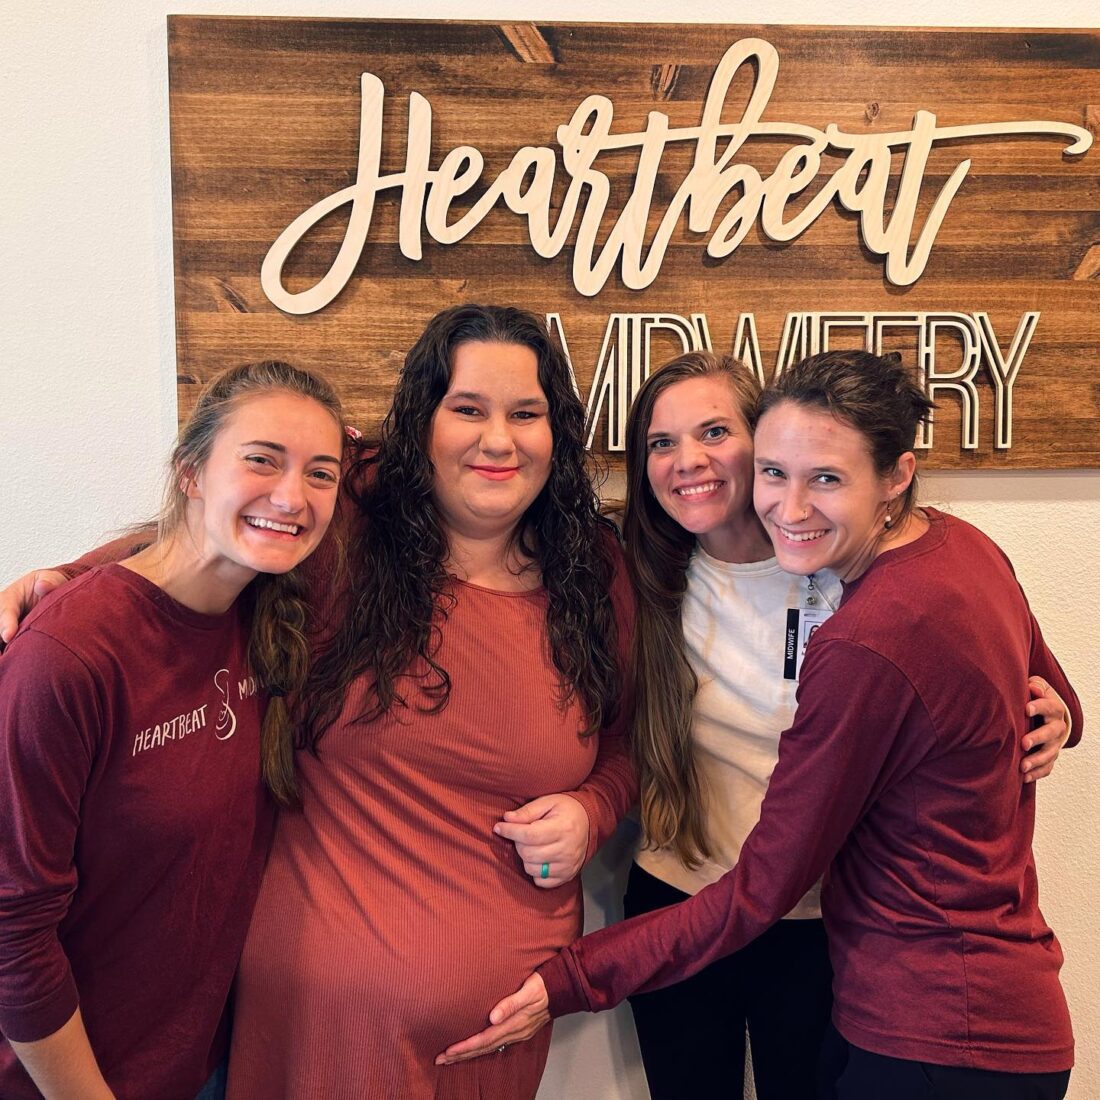 ✨🥳CONGRATULATIONS to Lauren, the winner of the Heartbeat Birth Package